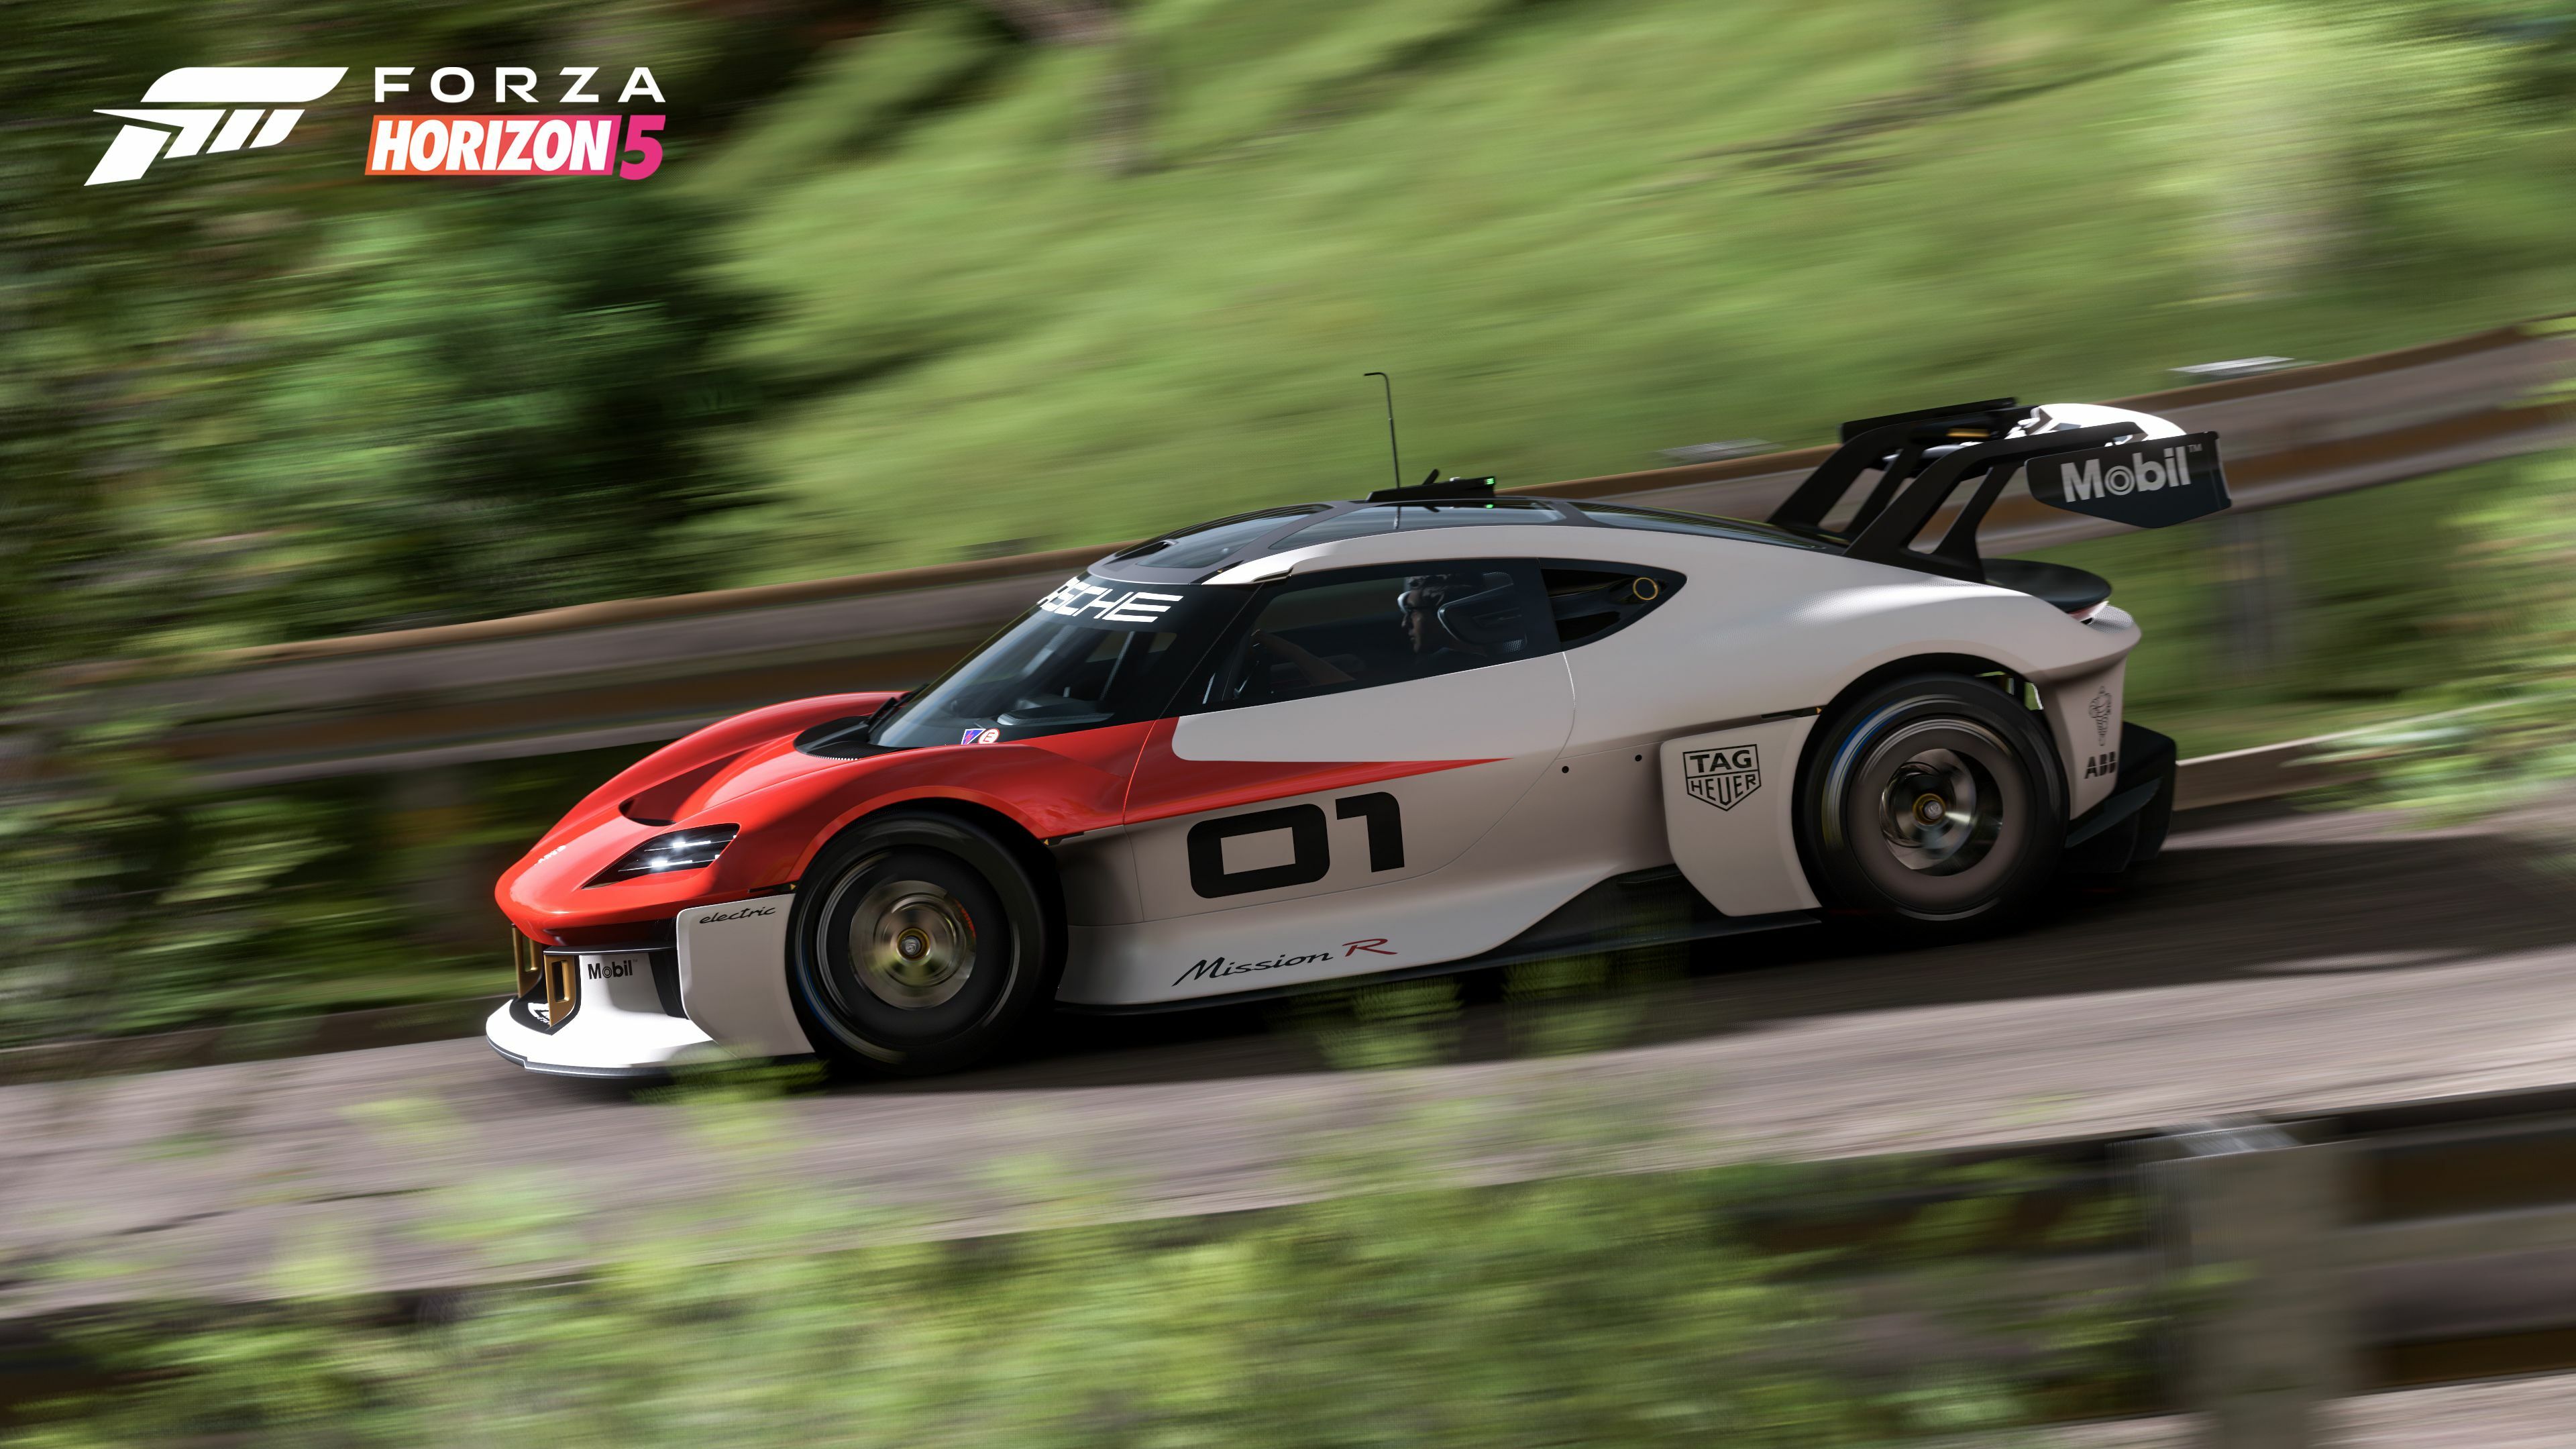 First Forza Horizon 5 expansion briefly appears on Steam: Hot